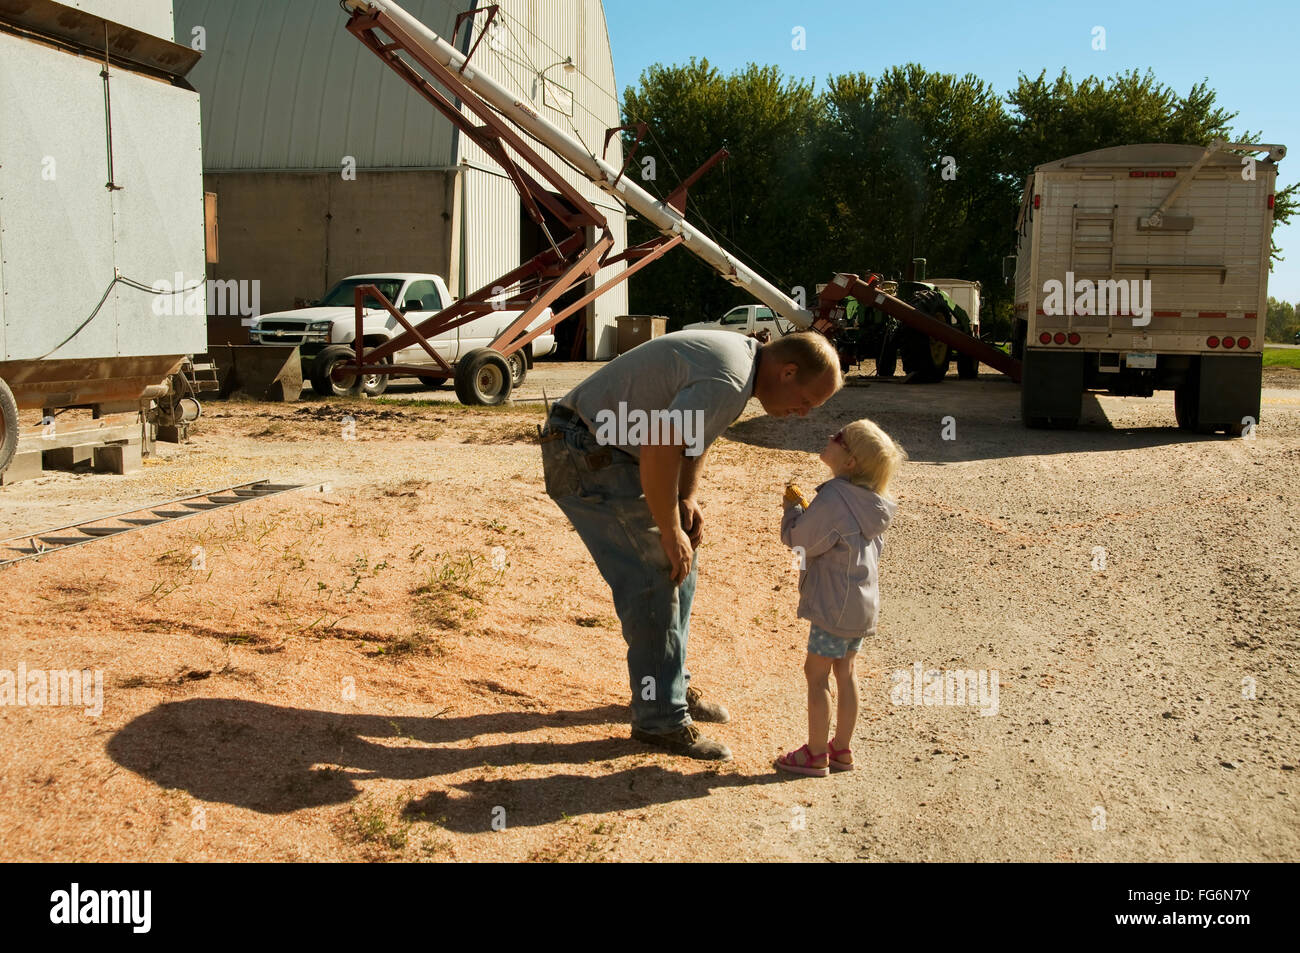 Agriculture - A Farmer And His Young Daughter Share A Moment Together During His Work Day Of Harvesting And Storing Grain Corn / Near Sioux City, I... Stock Photo